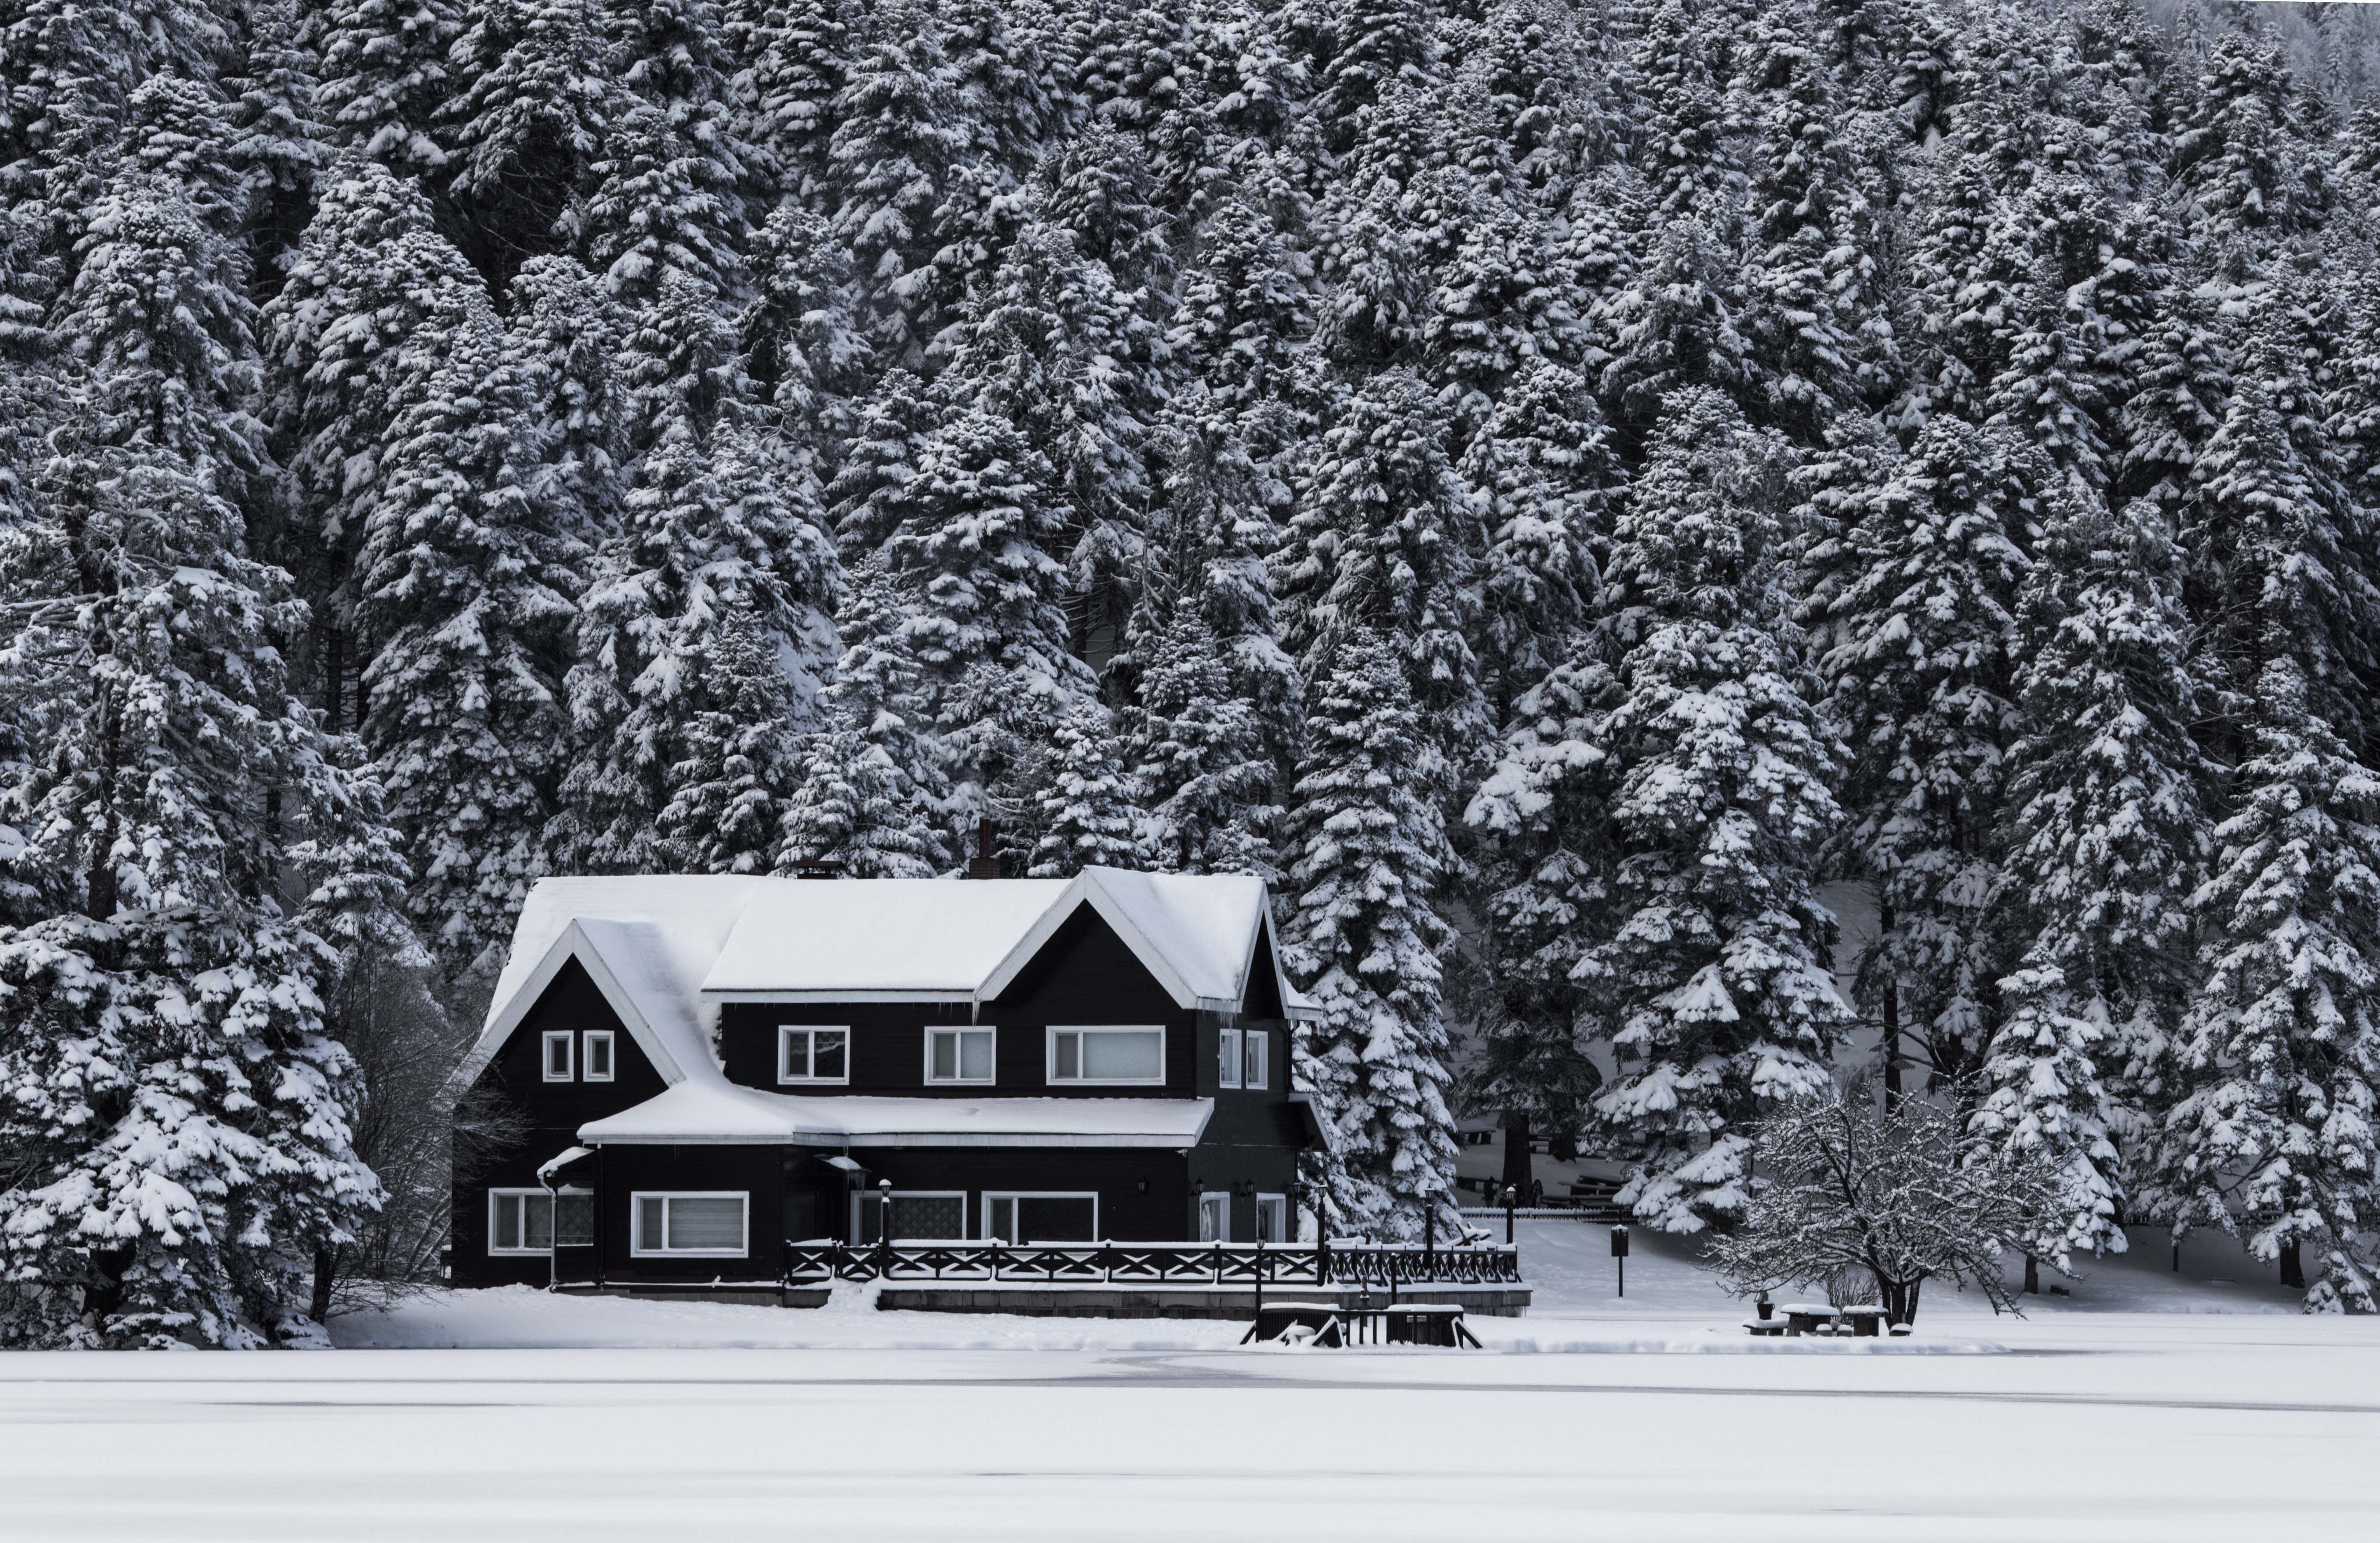 alone, calmness, cold, cool, forest, frost, frozen, home, house